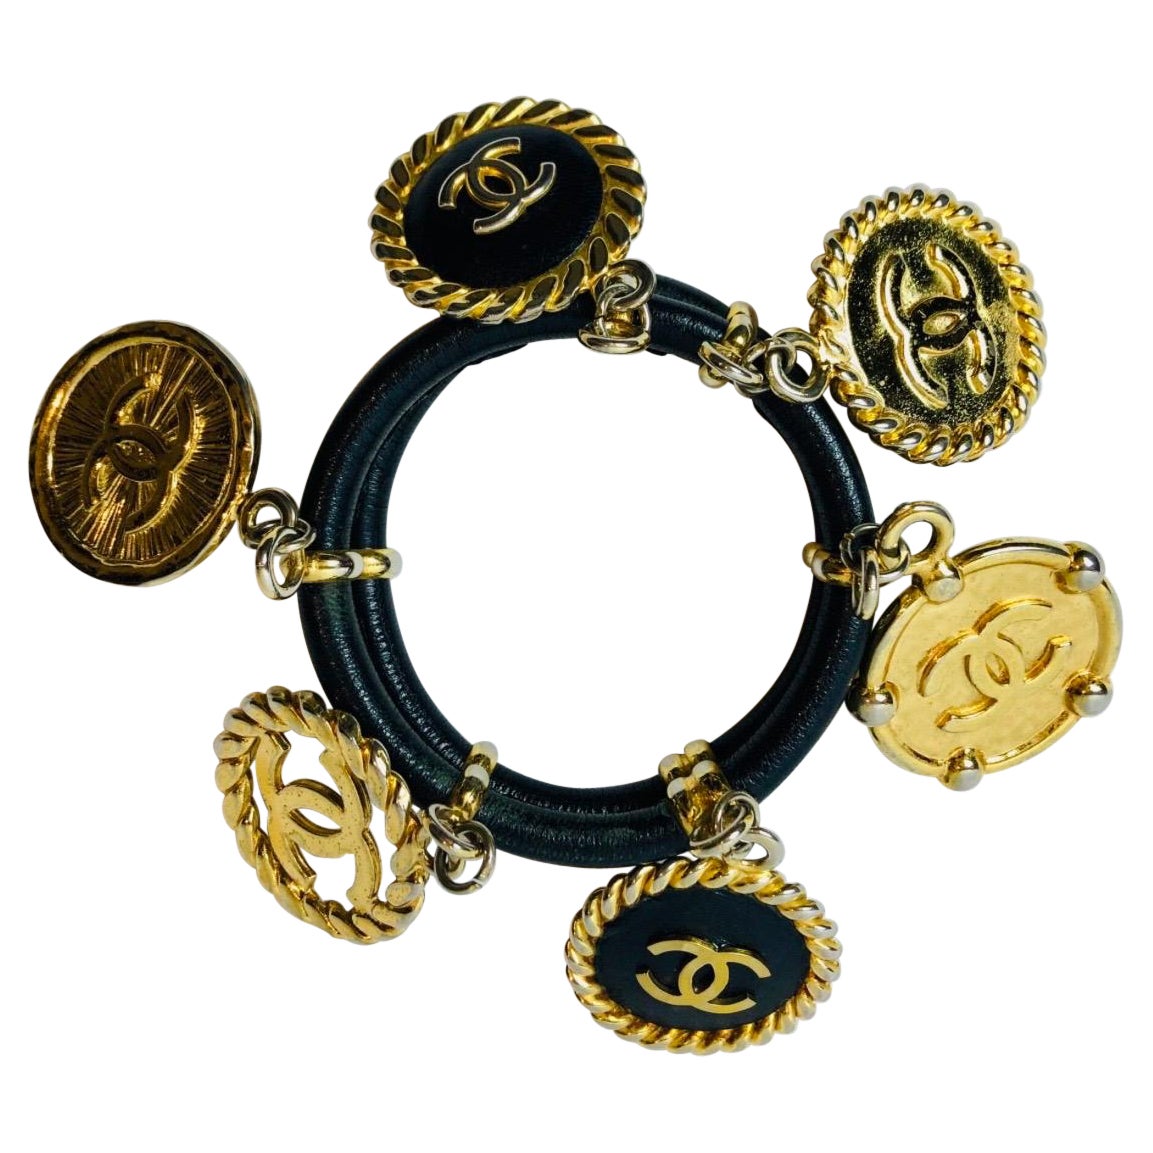 Vintage Chanel bracelet from the 90s